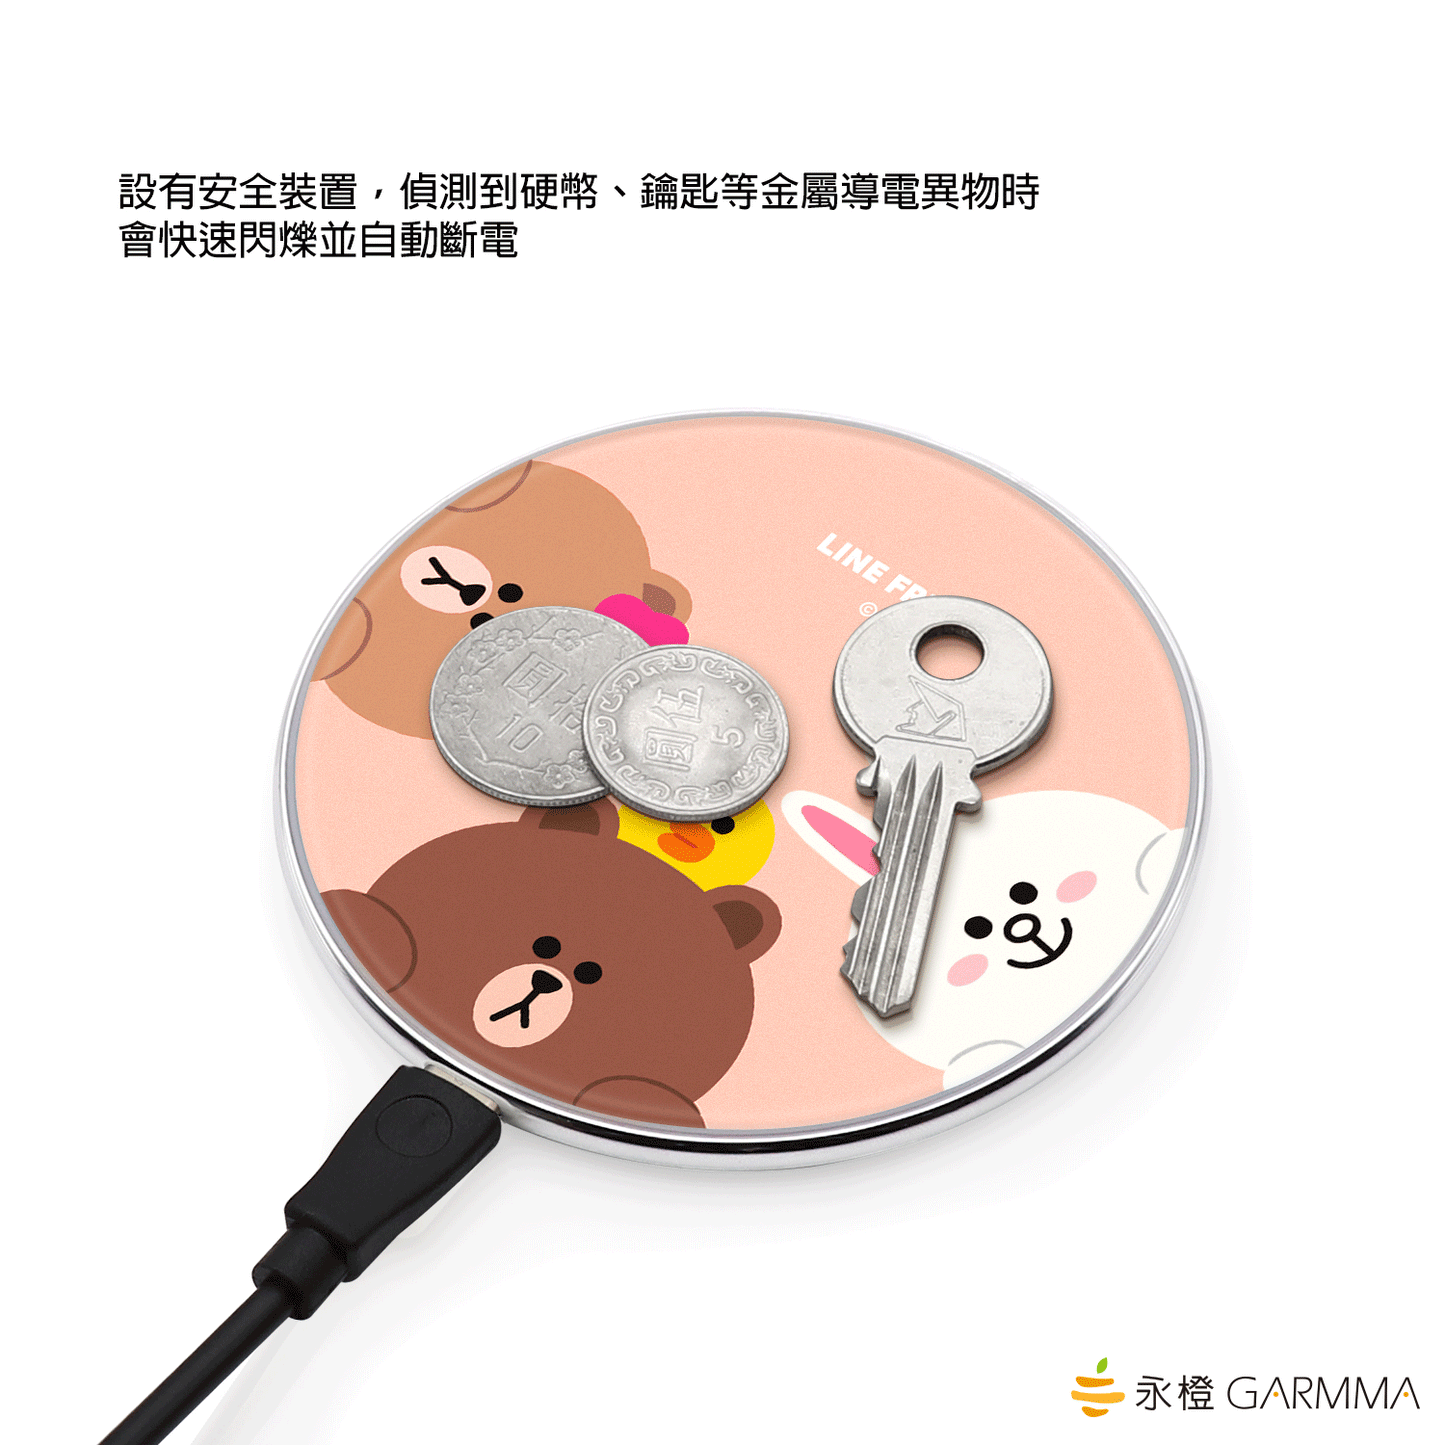 GARMMA Line Friends 15W Fast Charging Pad Wireless Charger